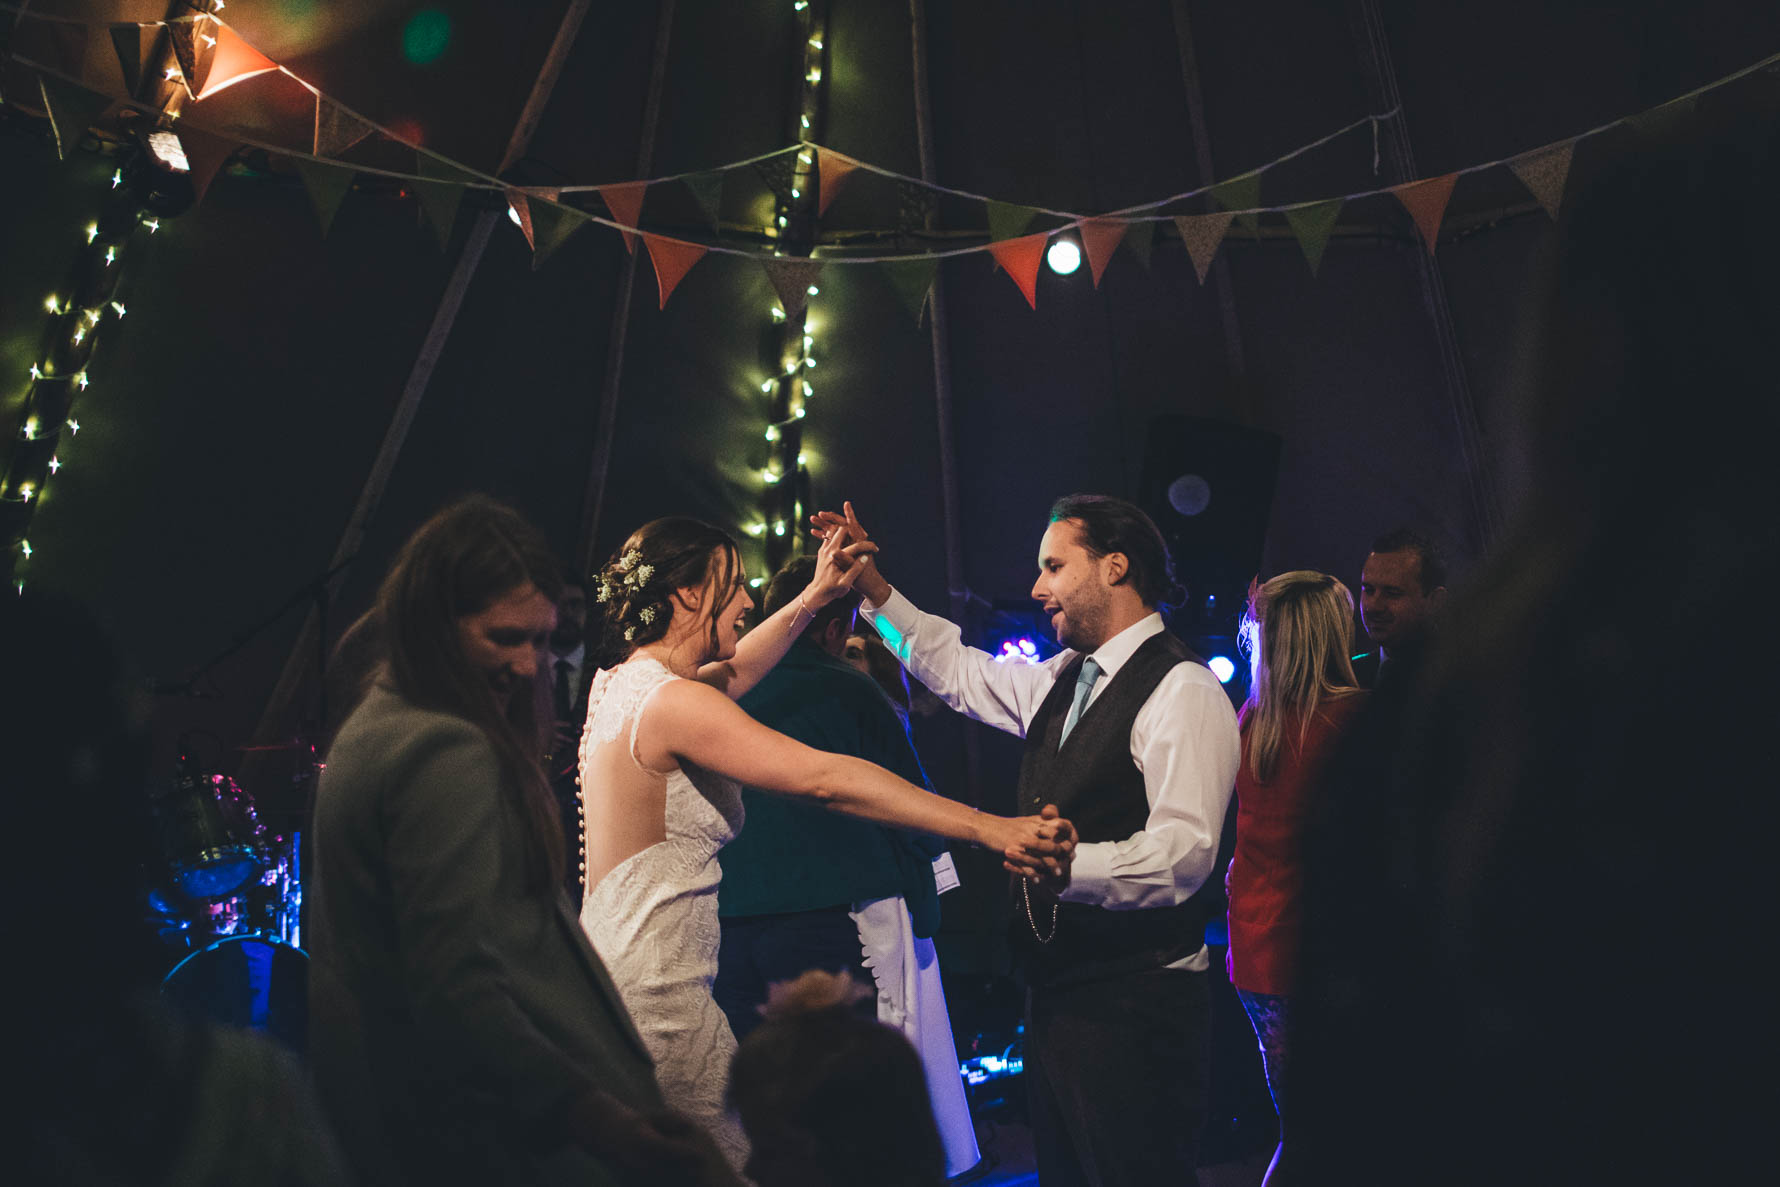 Bride and groom with their hands togetherin the air as they dance inside a tipi with bunting and fairylights on the supports of the tipi